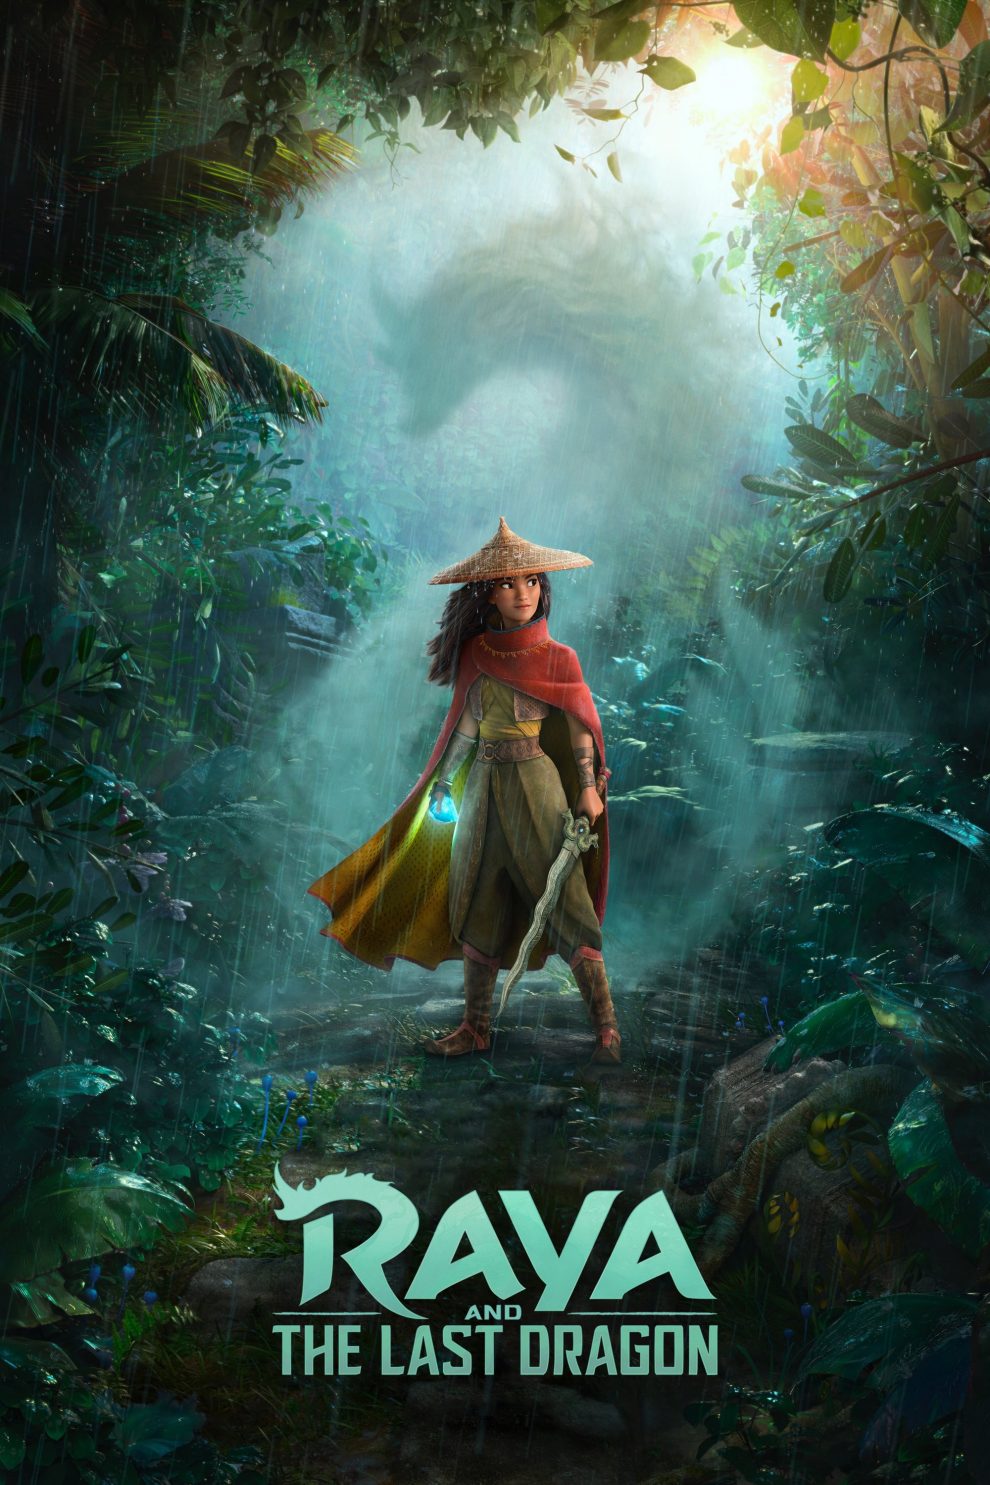 Poster for the movie "Raya and the Last Dragon"